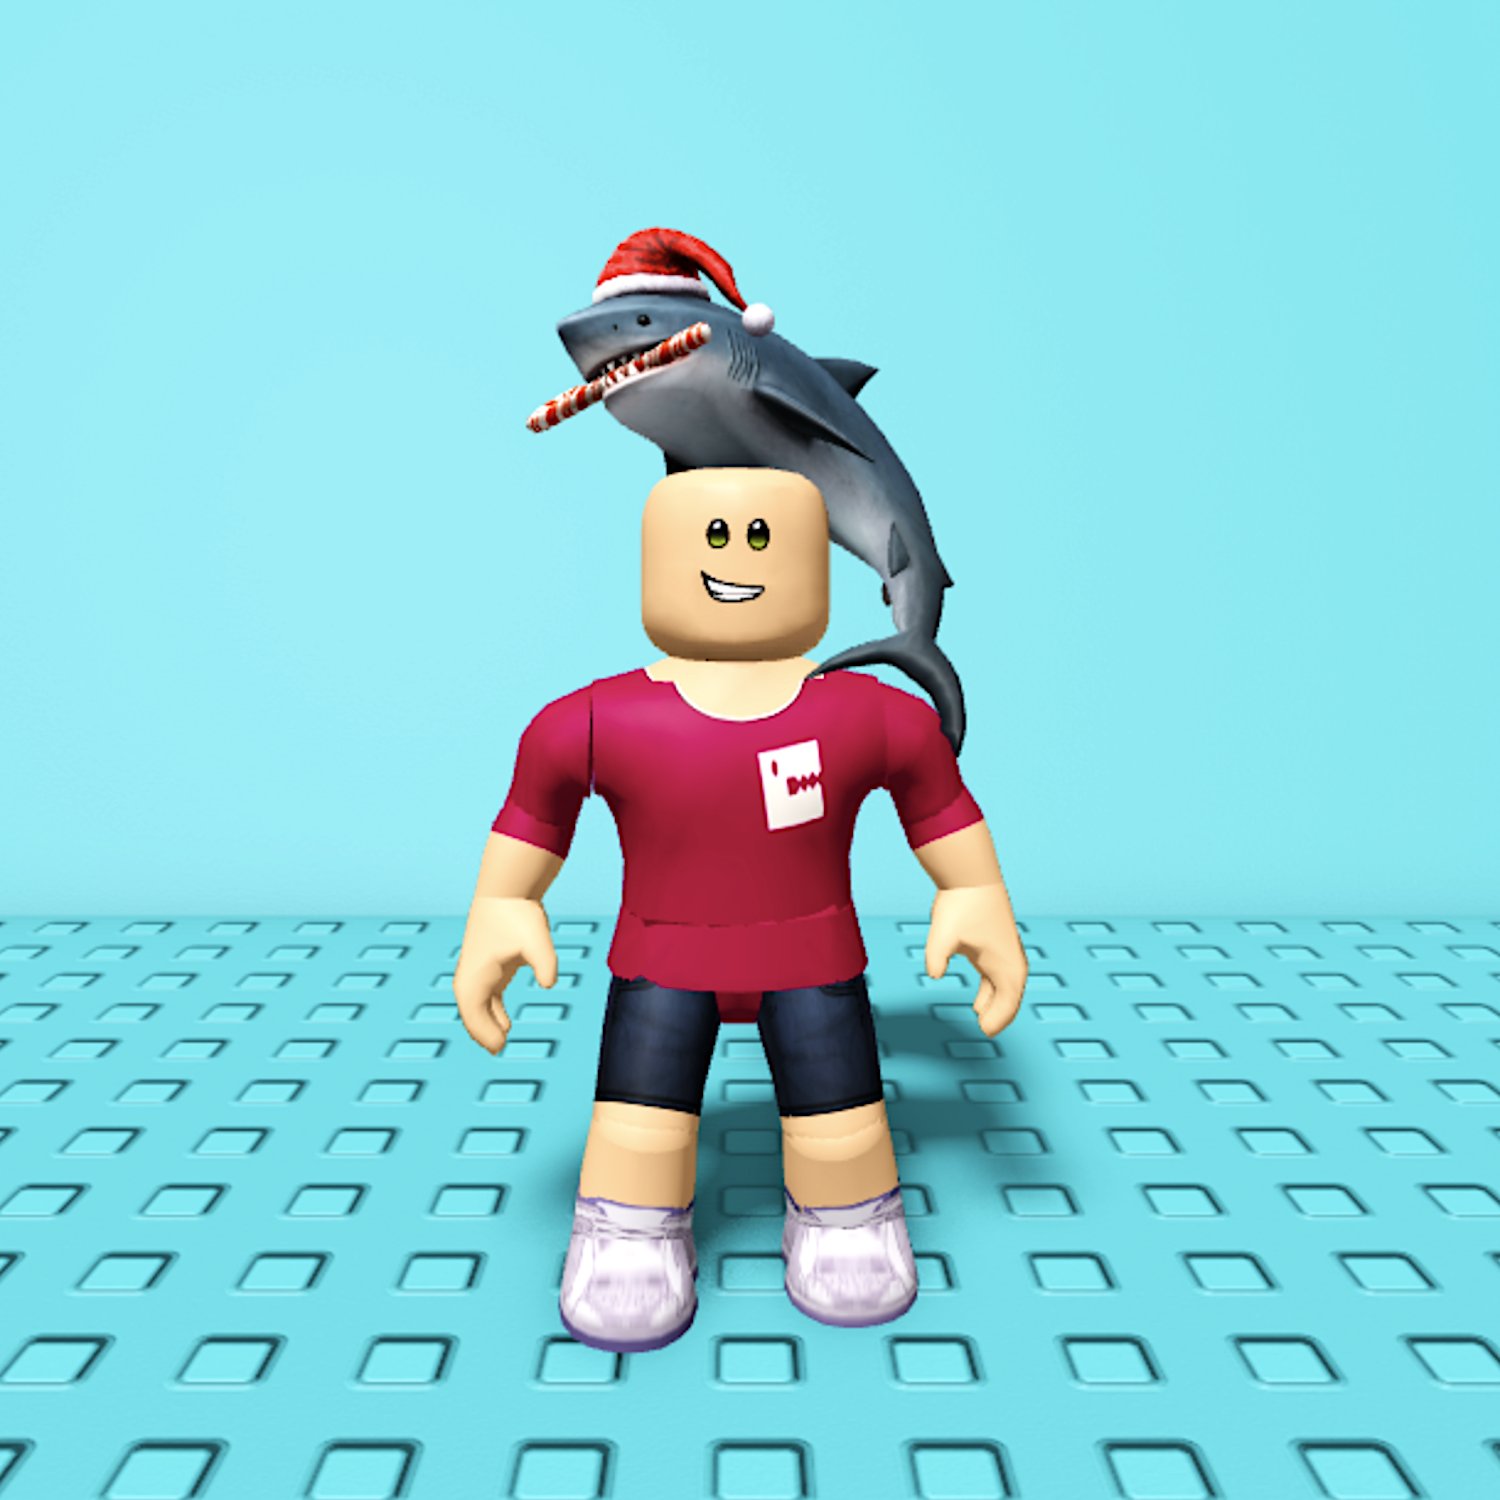 This game is Anime skin shop #roblox #robloxavatar #robloxmorph #rob